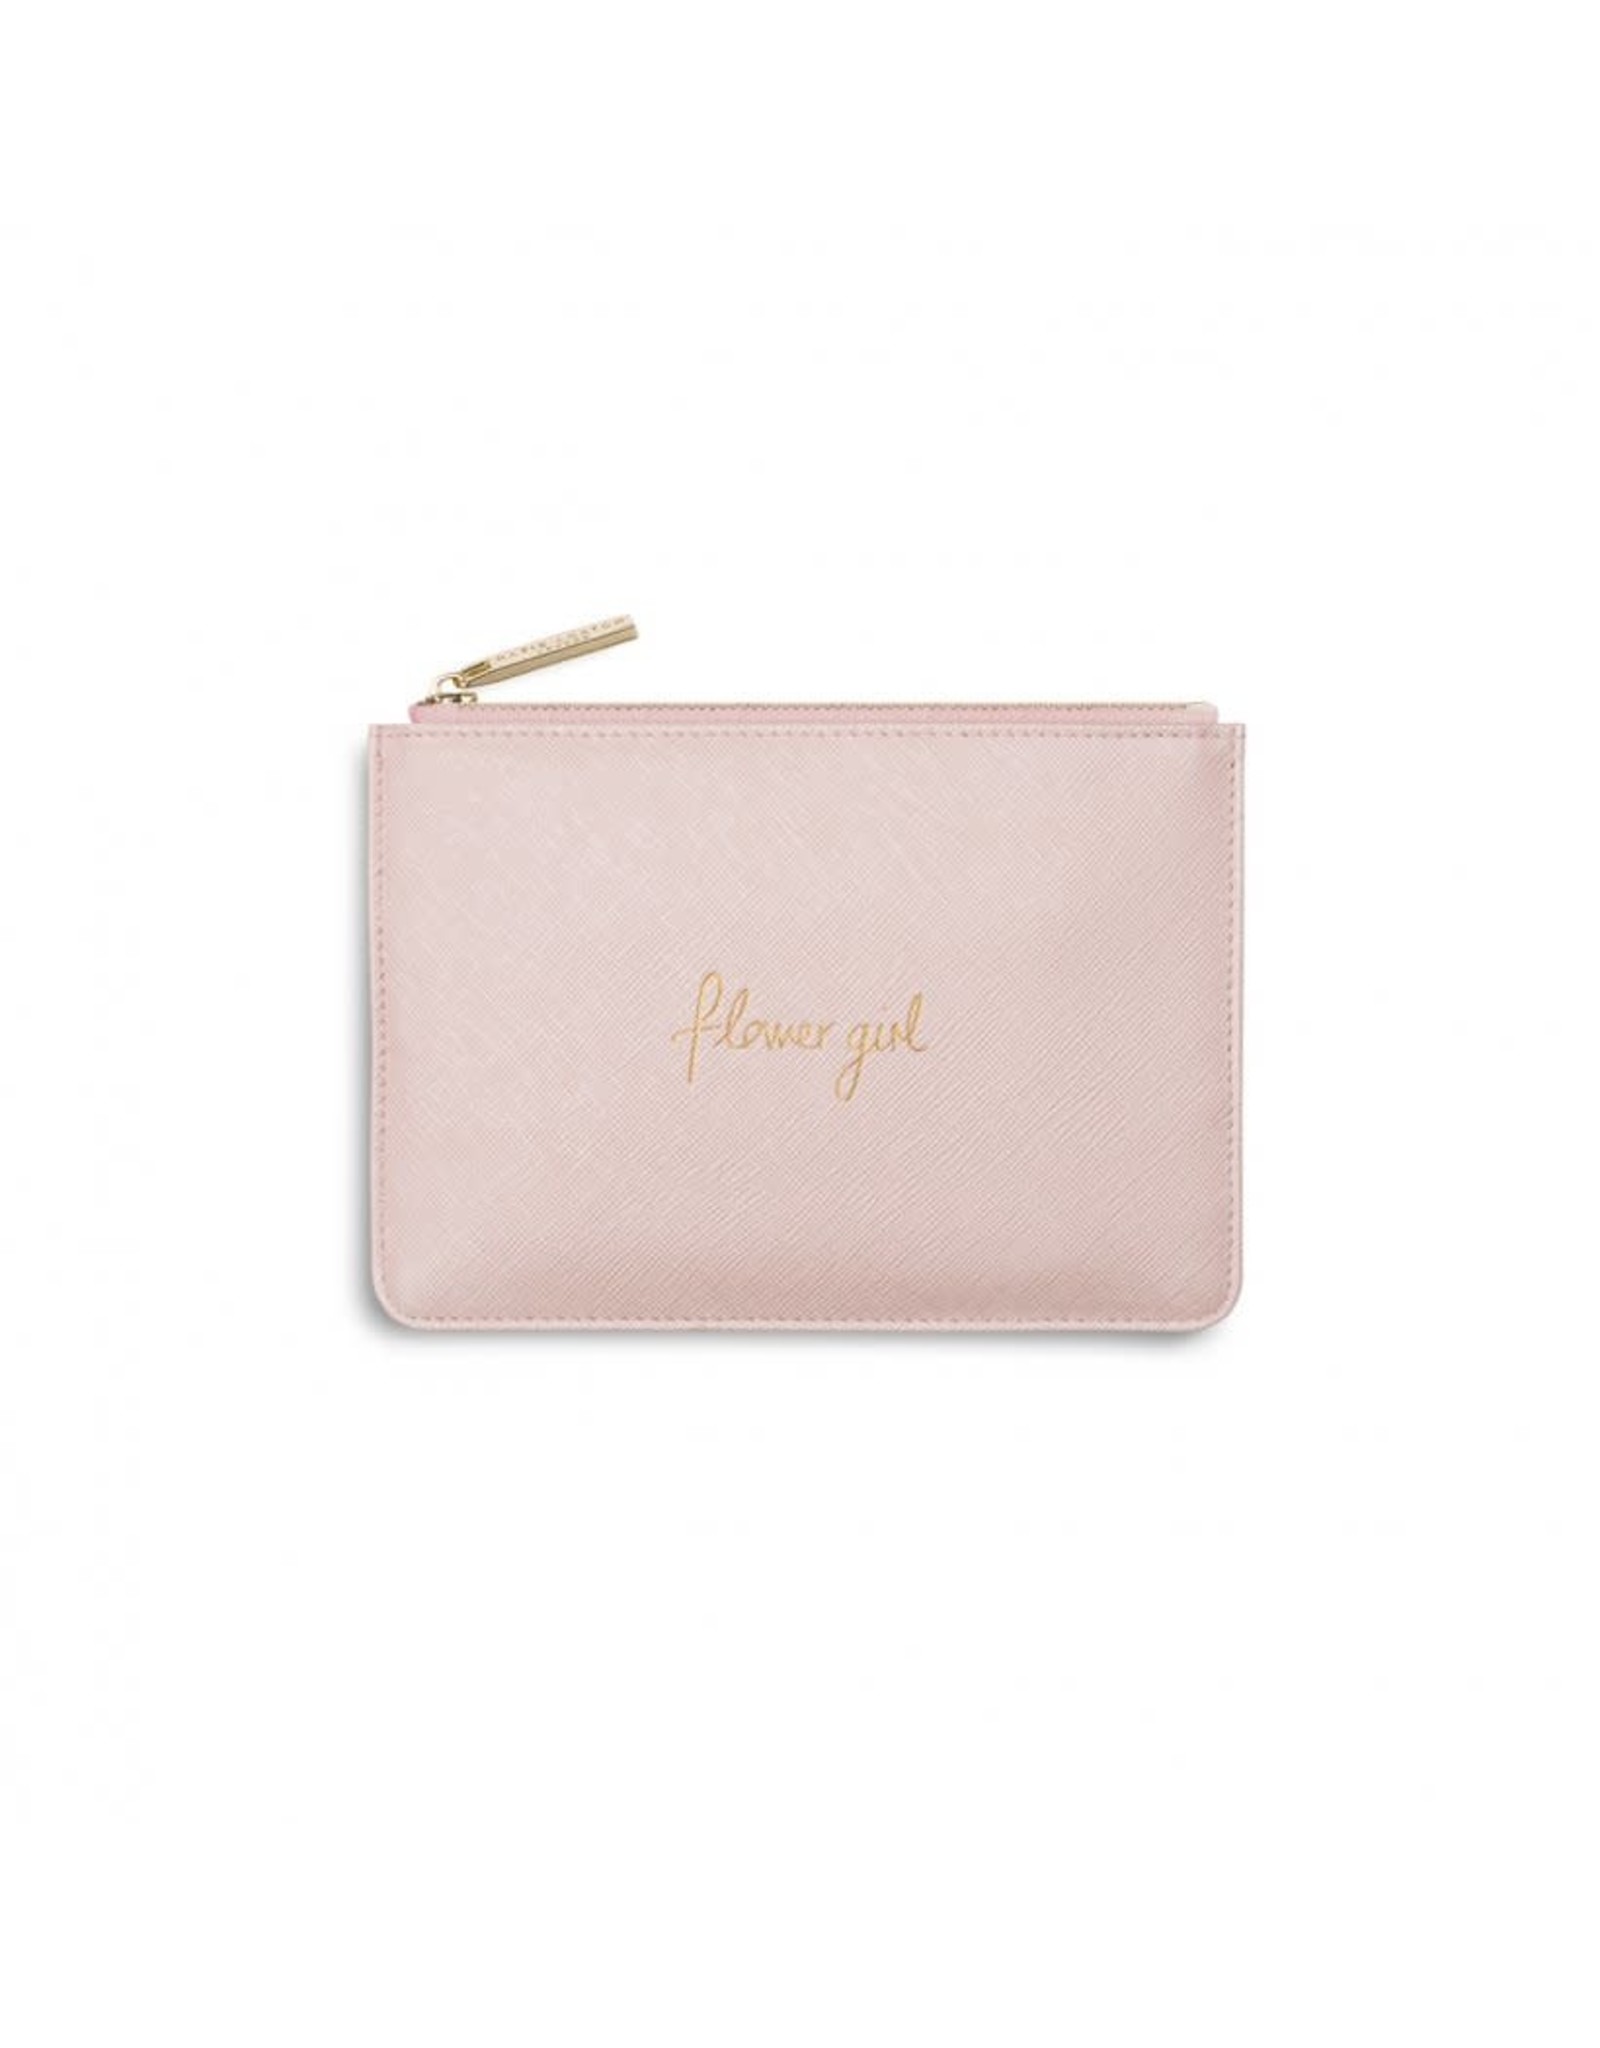 KATIE LOXTON FLOWER GIRL MINI PERFECT POUCH PINK